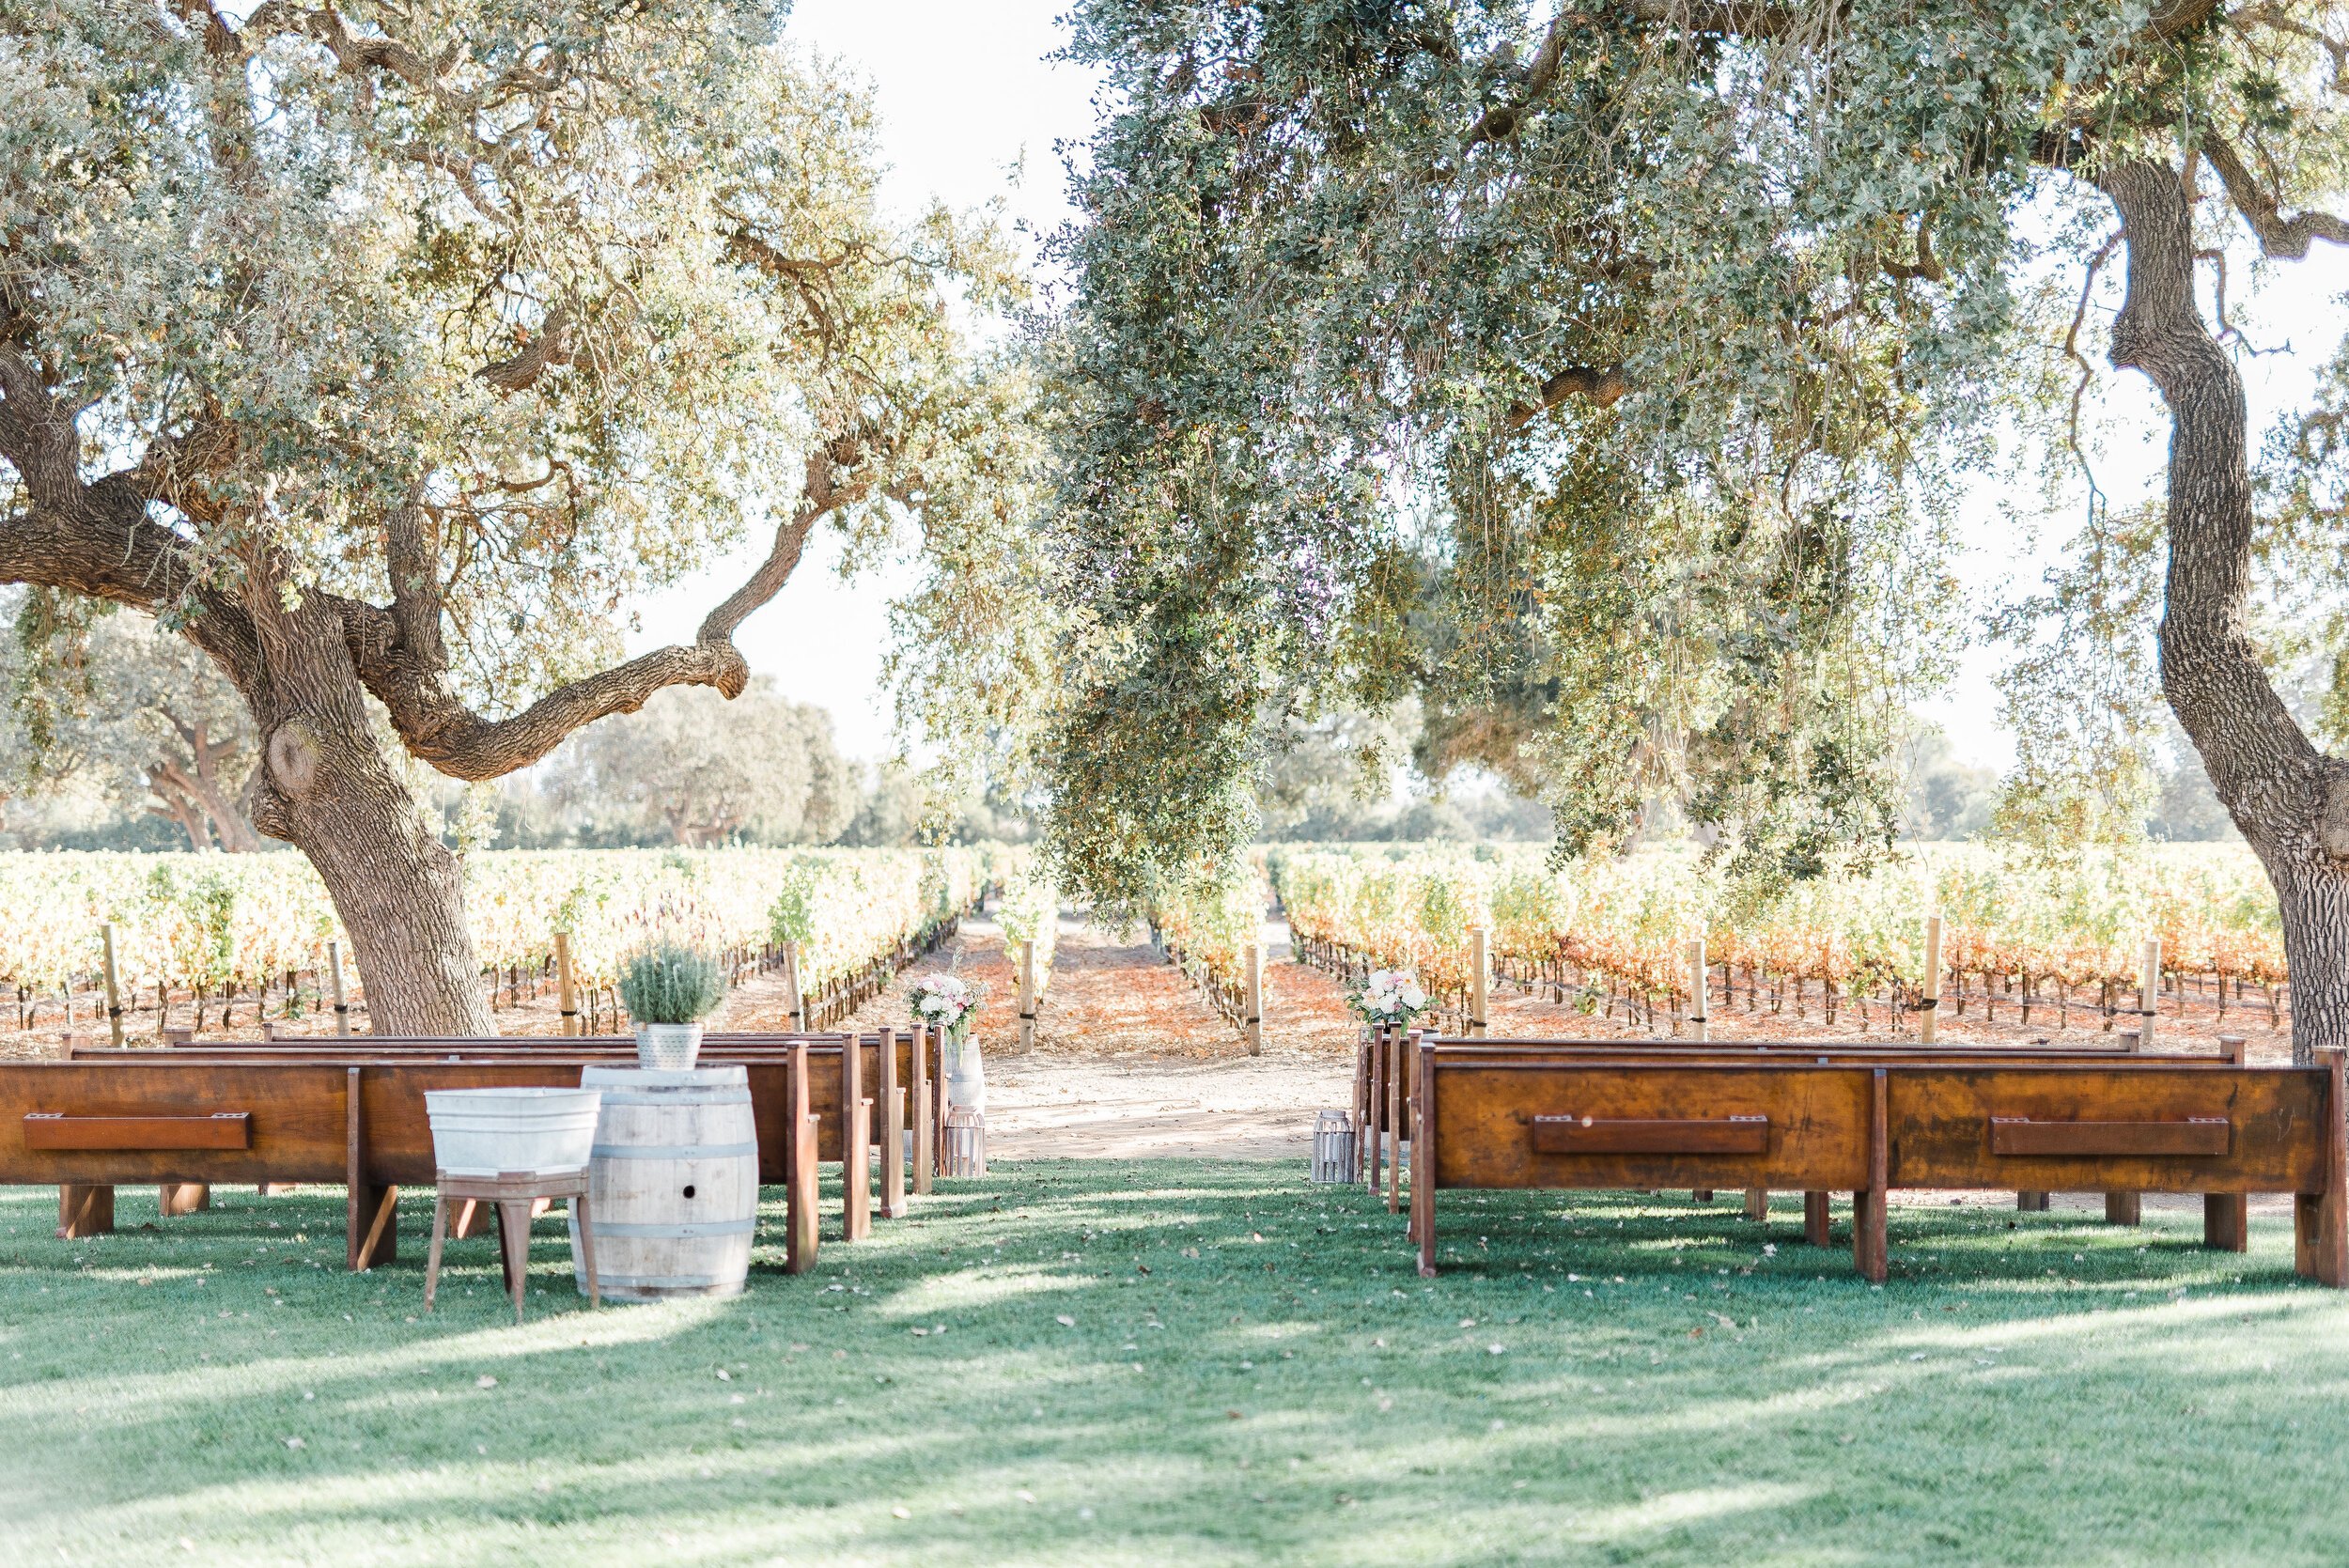 www.santabarbarawedding.com | Roblar Winery and Farm | Brittany Taylor Photography | Ceremony Set Up with a View of the Vineyard